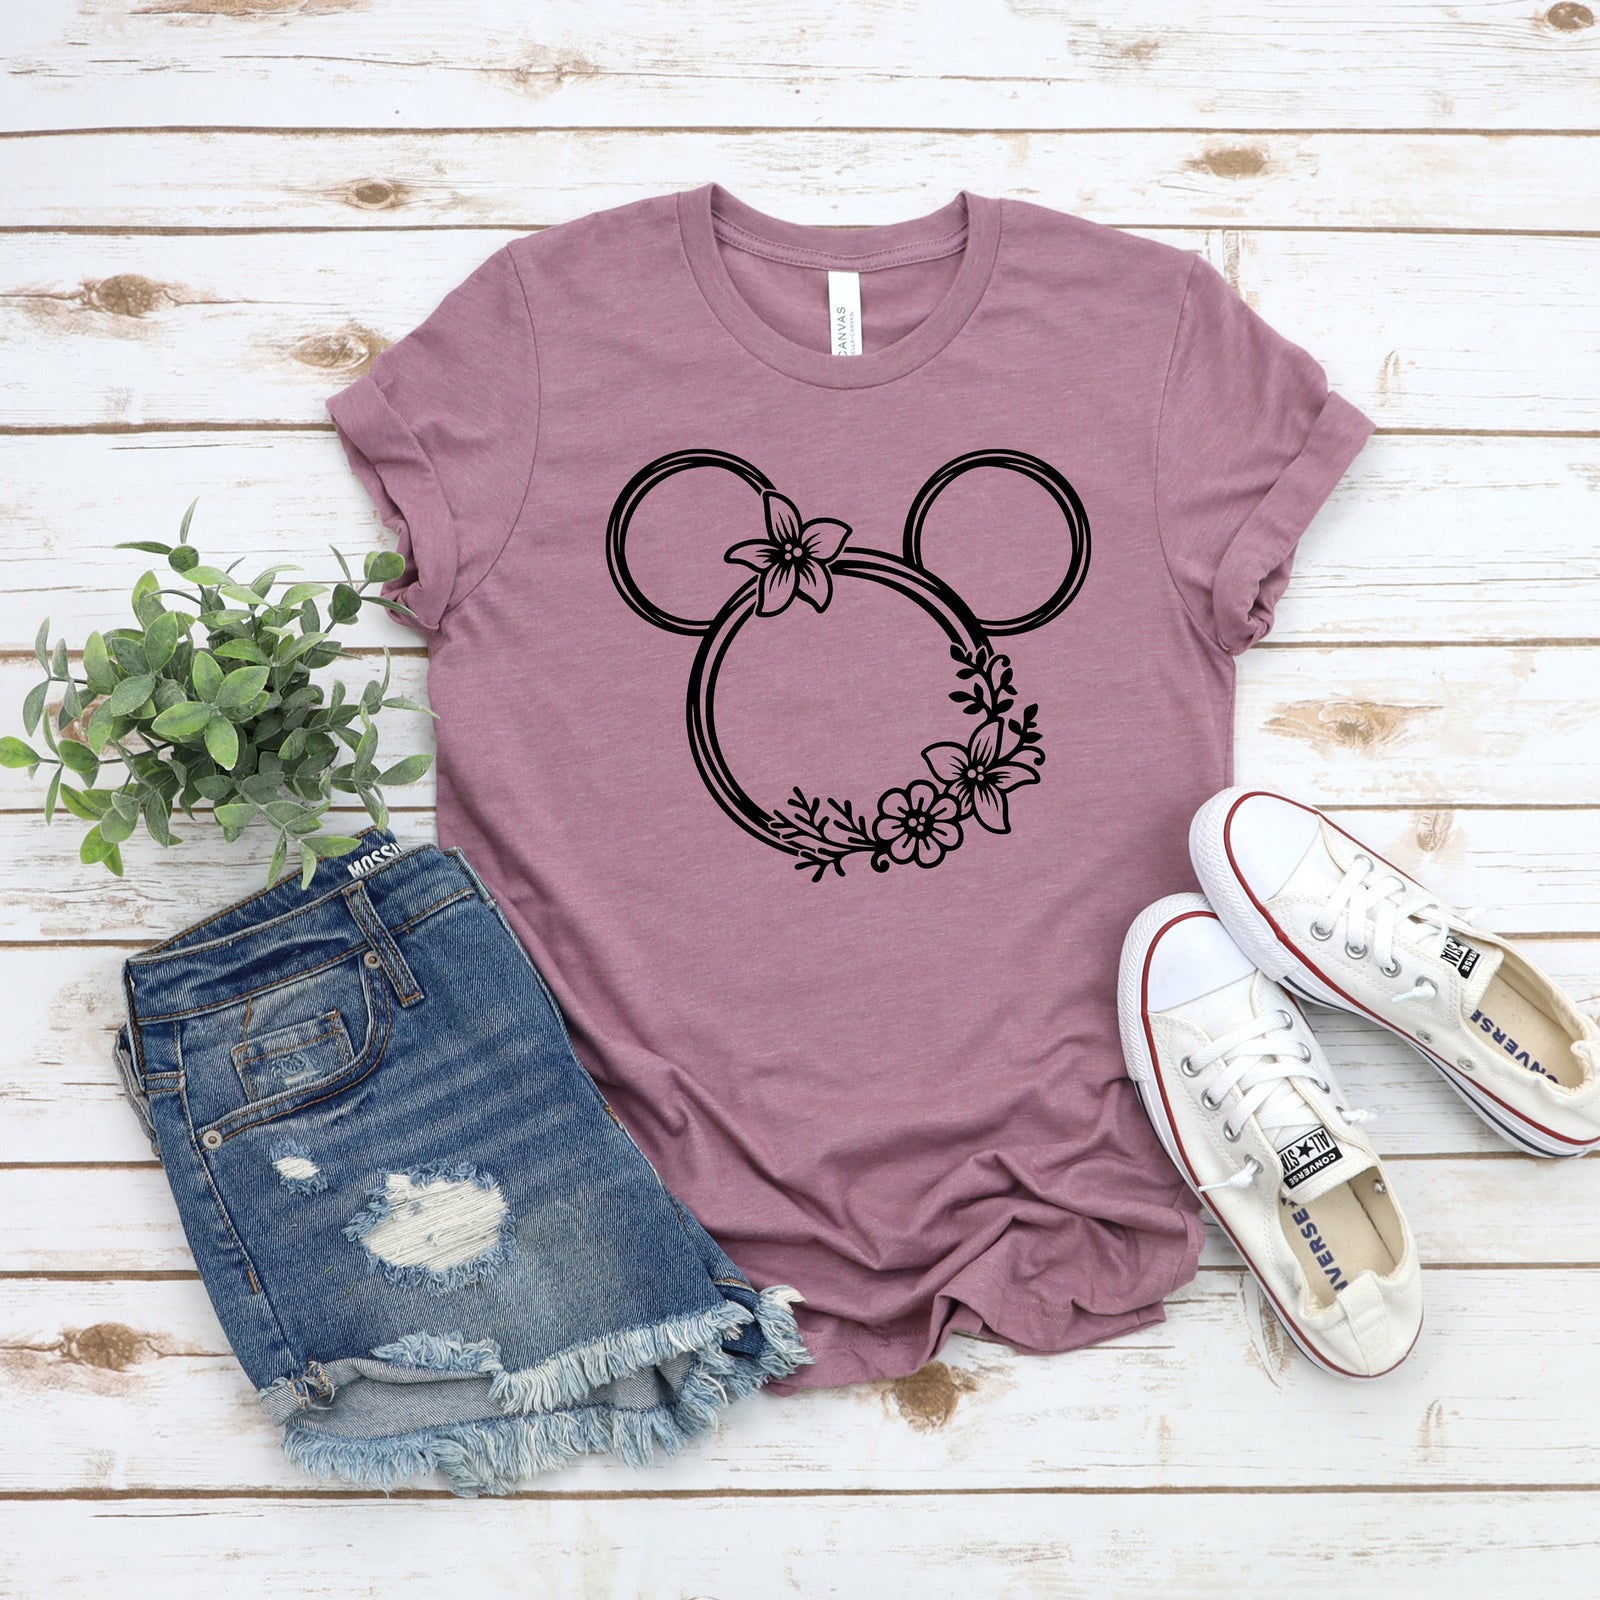 Floral Scribble Mickey Adult T Shirt - Mickey Mouse T Shirt - Epcot Flower and Garden Festival Shirt